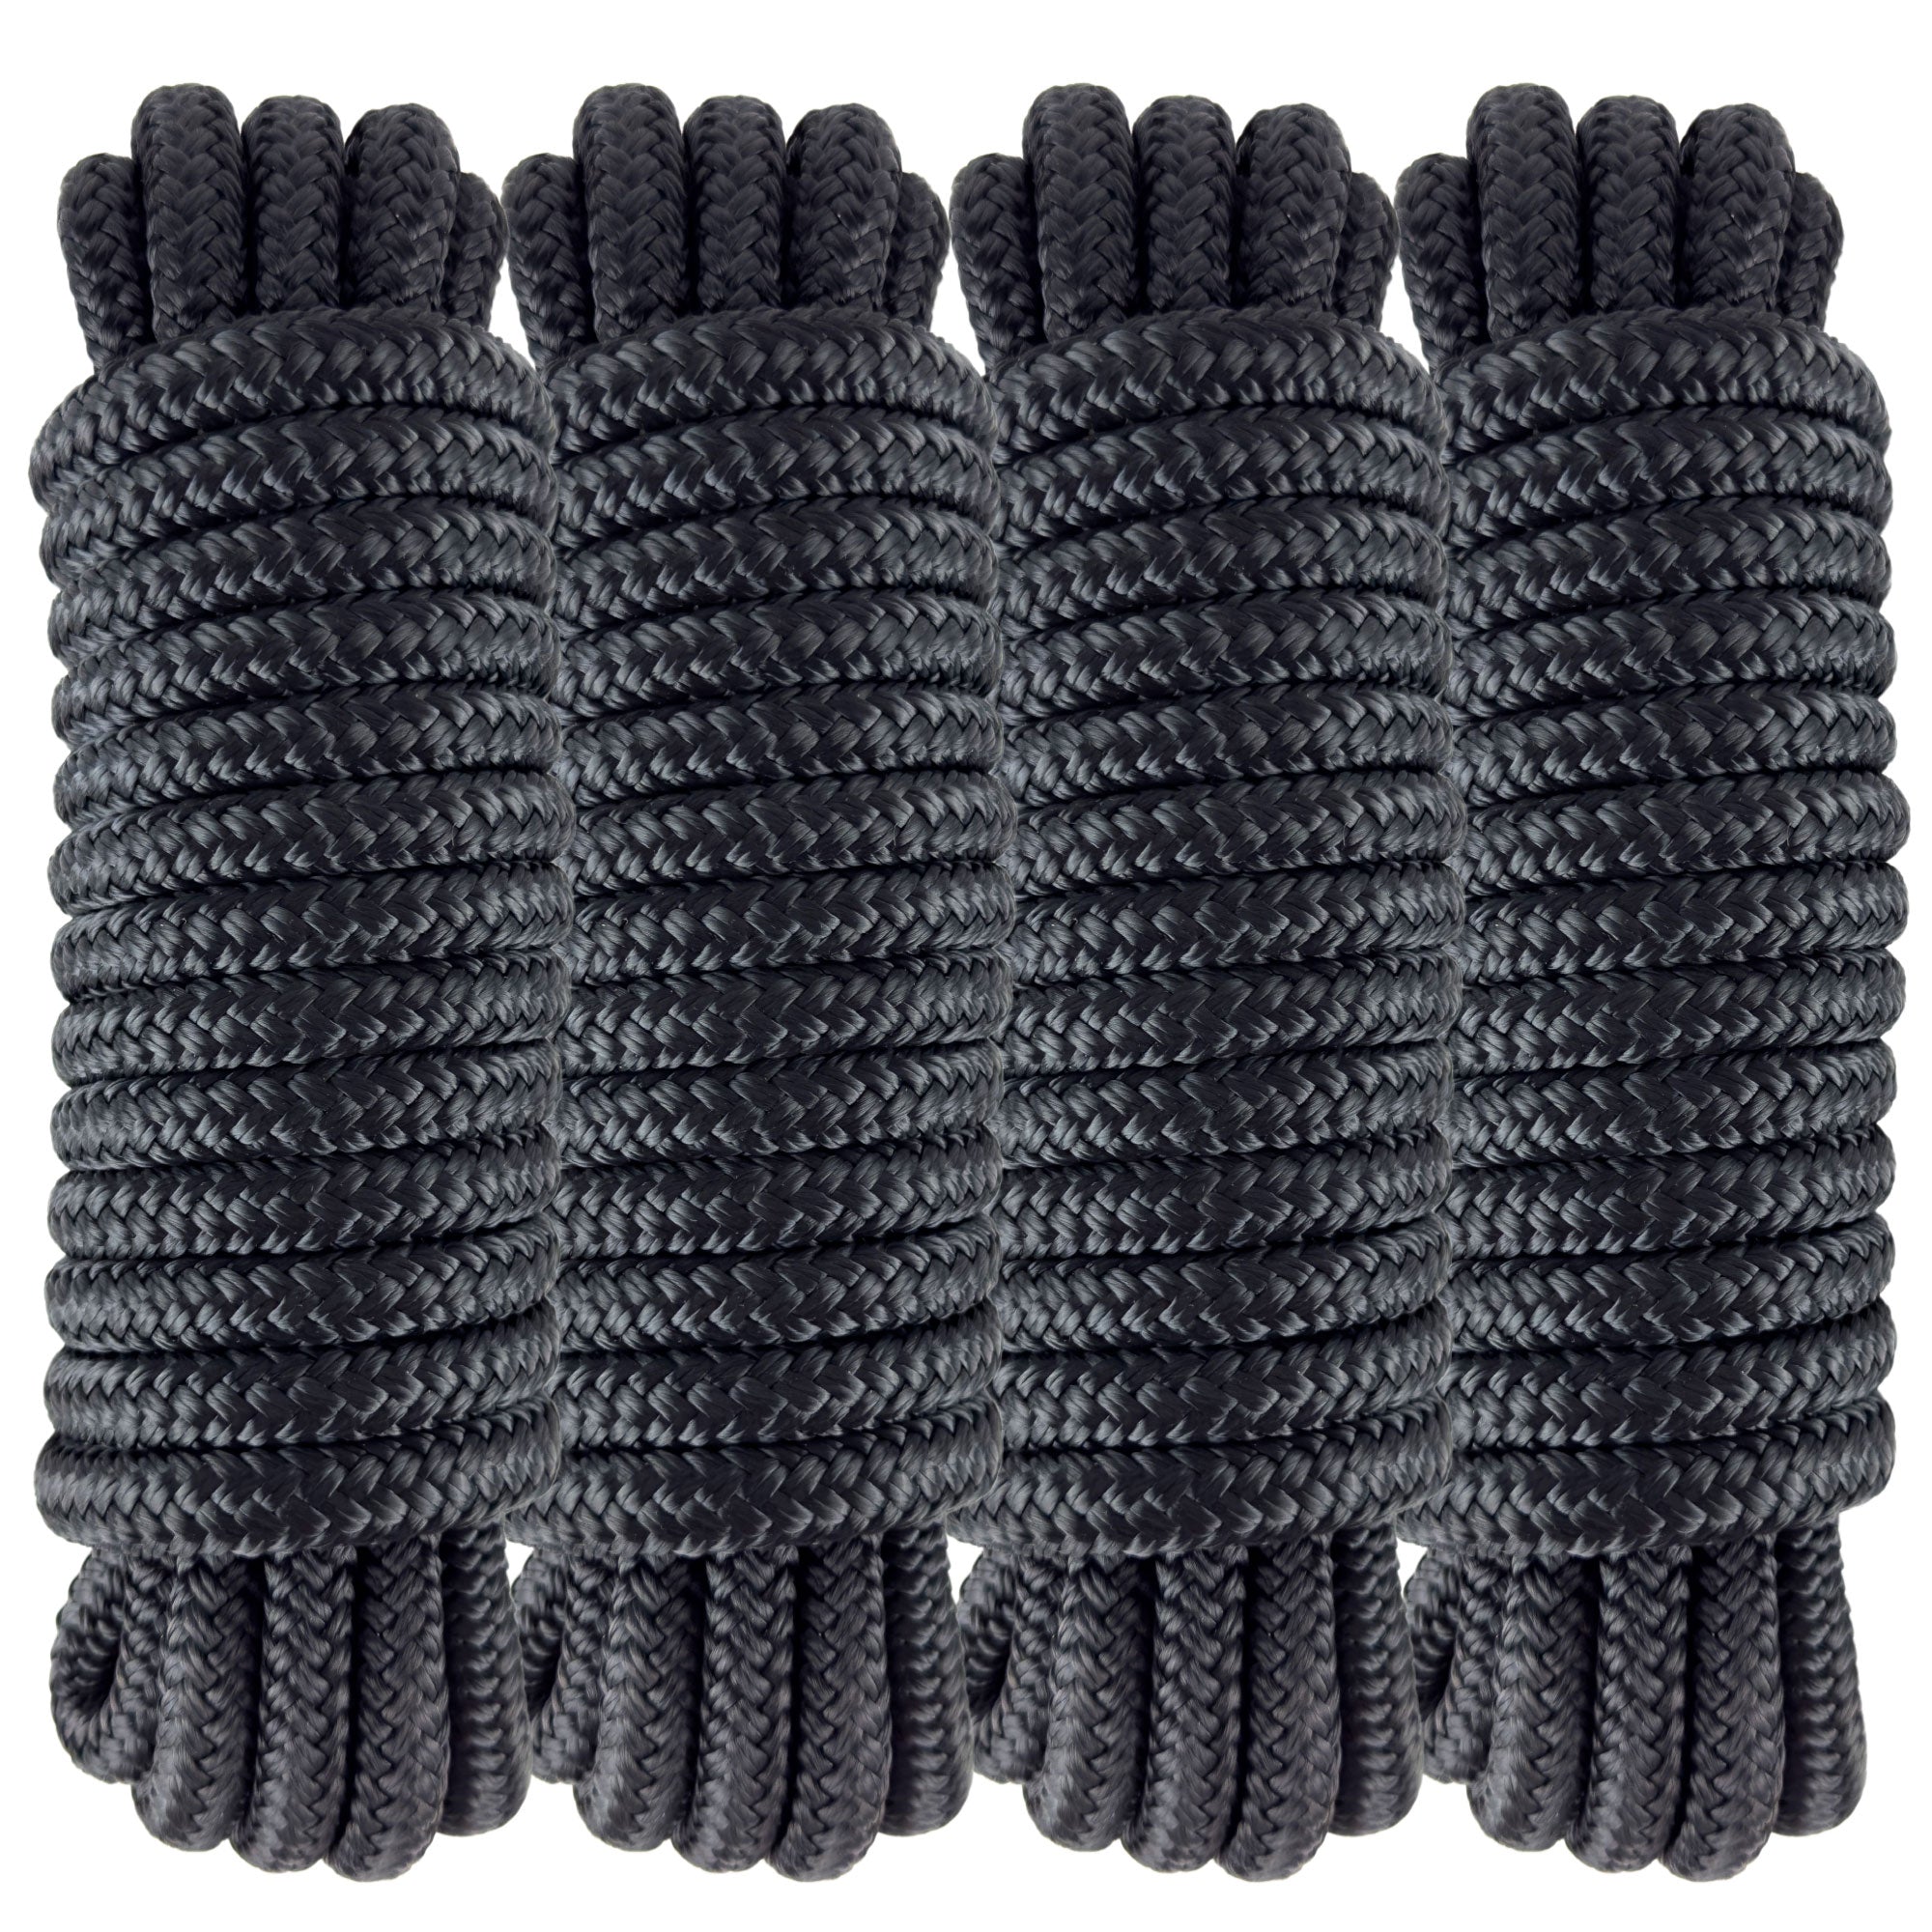 Dock Lines, 1/2" x 20', Black Nylon Double Braided with 12" Eyelet, 4-Pack - FO4451-M4